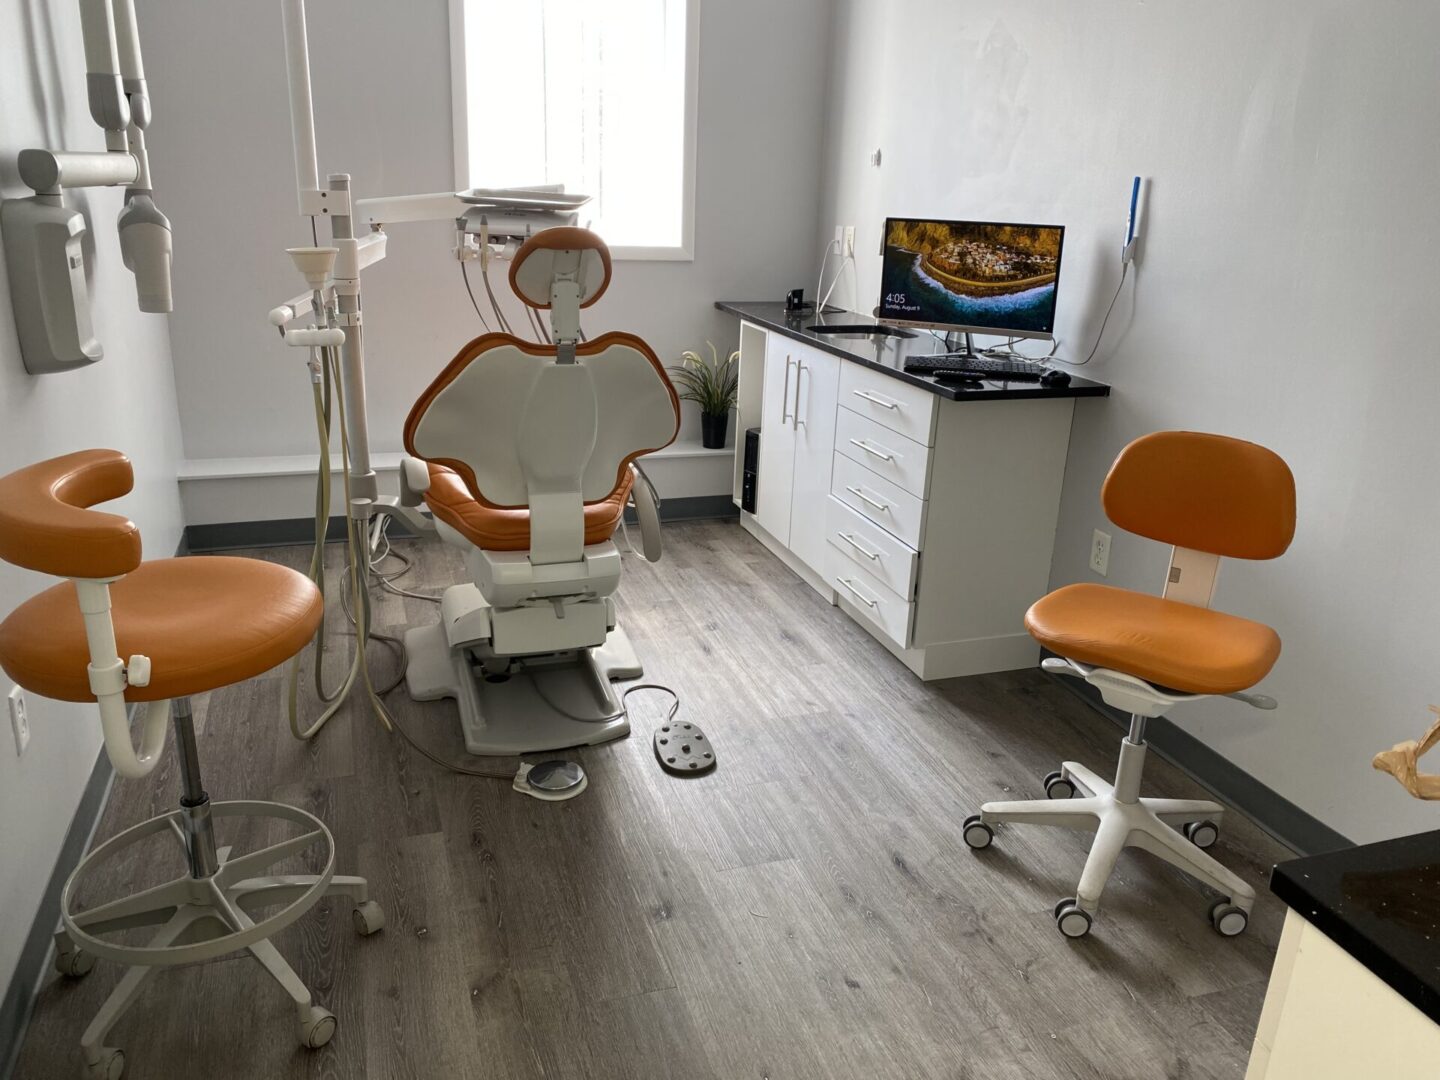 A dentist 's office with orange chairs and white walls.